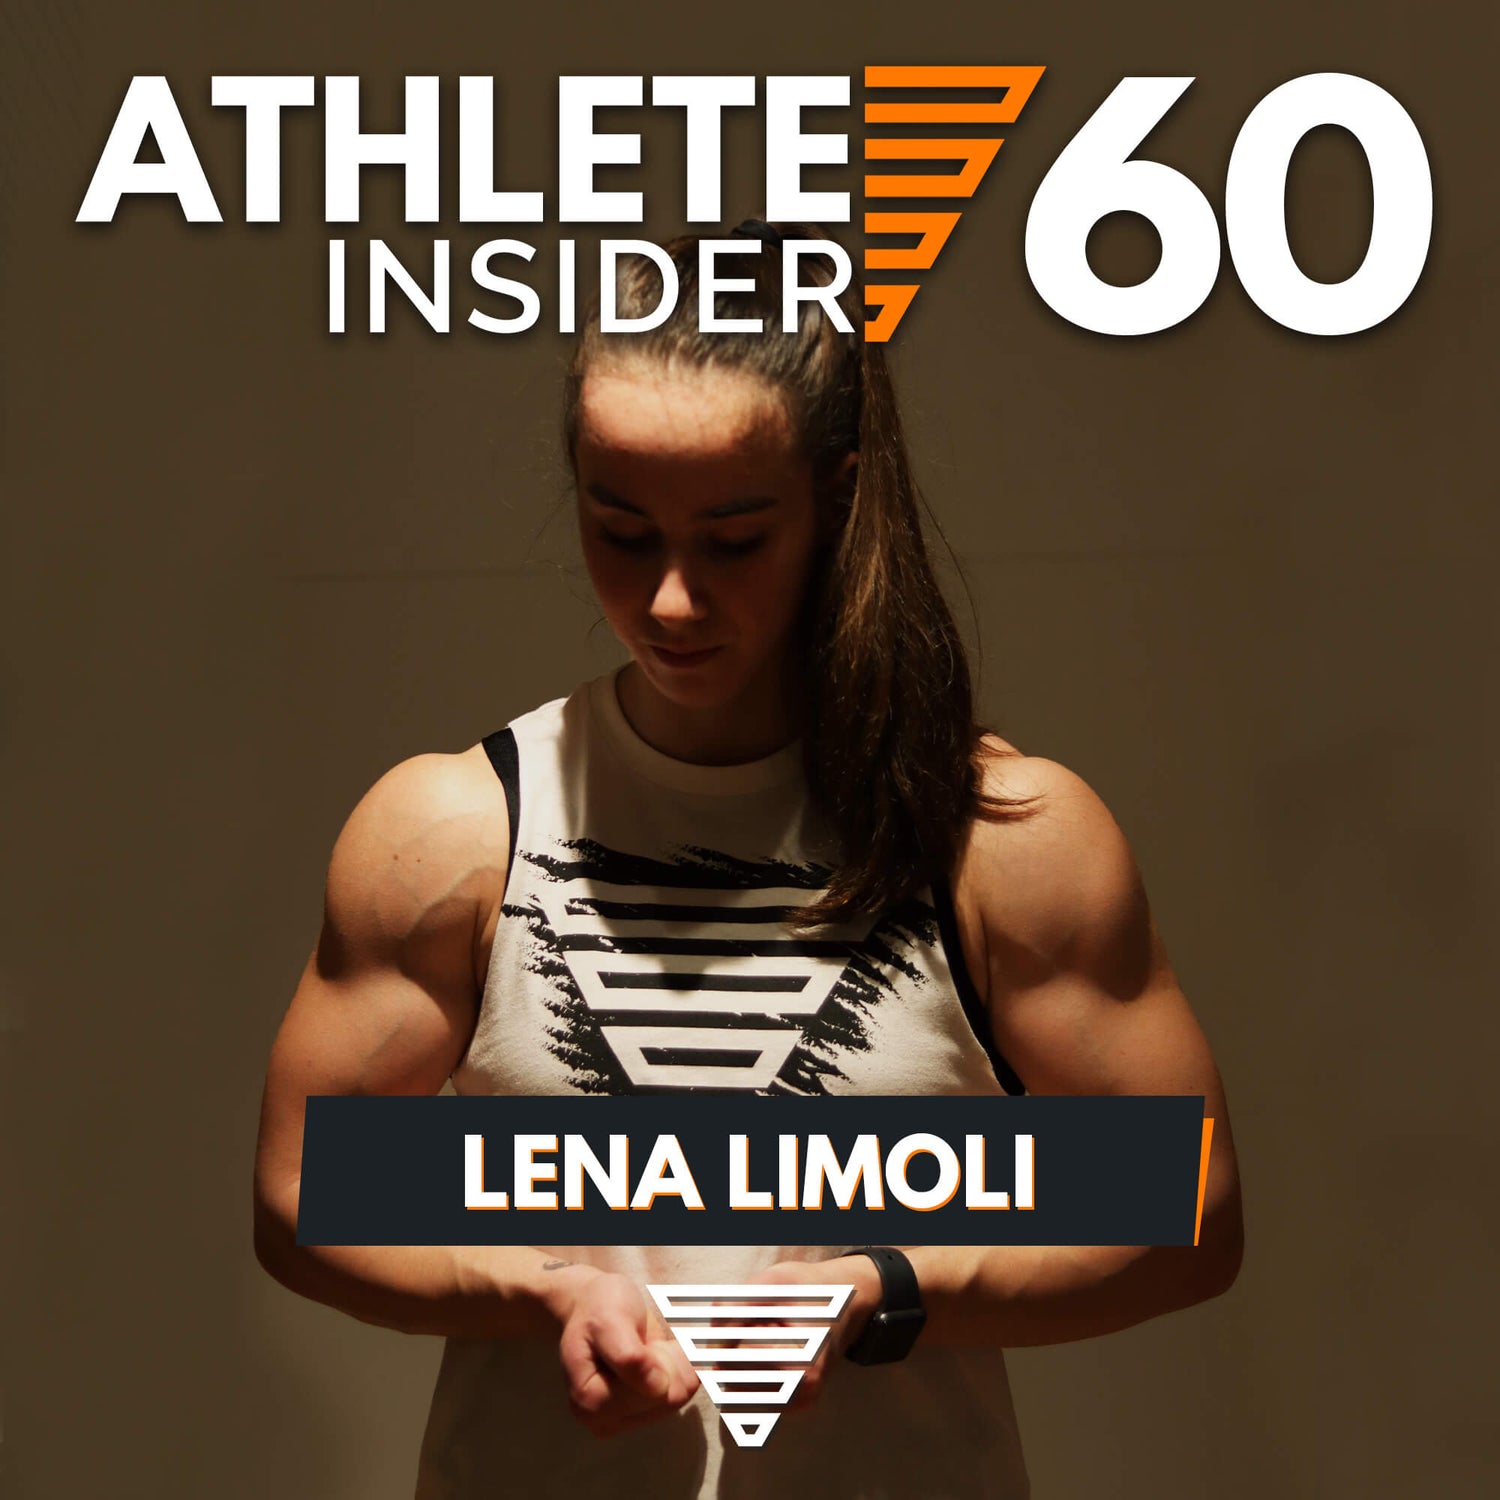 STRADDLE PLANCHE AFTER 1,5 YEARS | Interview with Lena Limoli | Athlete Insider Podcast #60